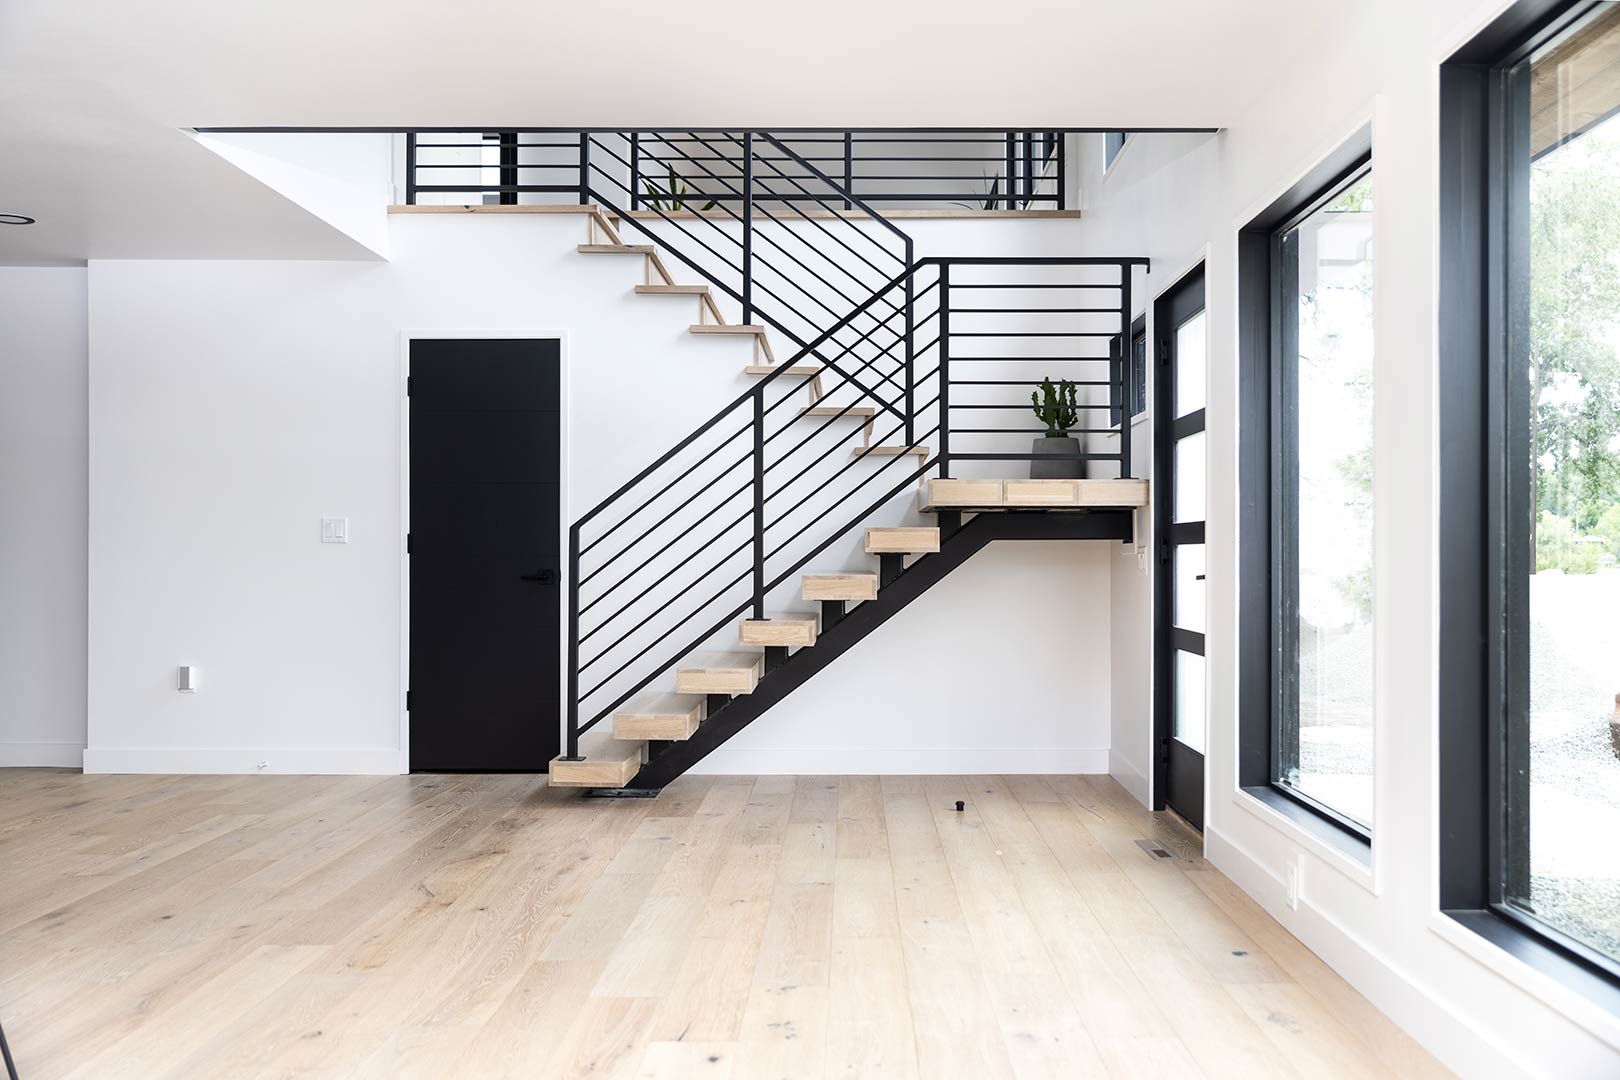 View of the stunning custom white oak floating stair-step staircase with a powder-coated steel handrail designed and installed by Freestone Design-Build